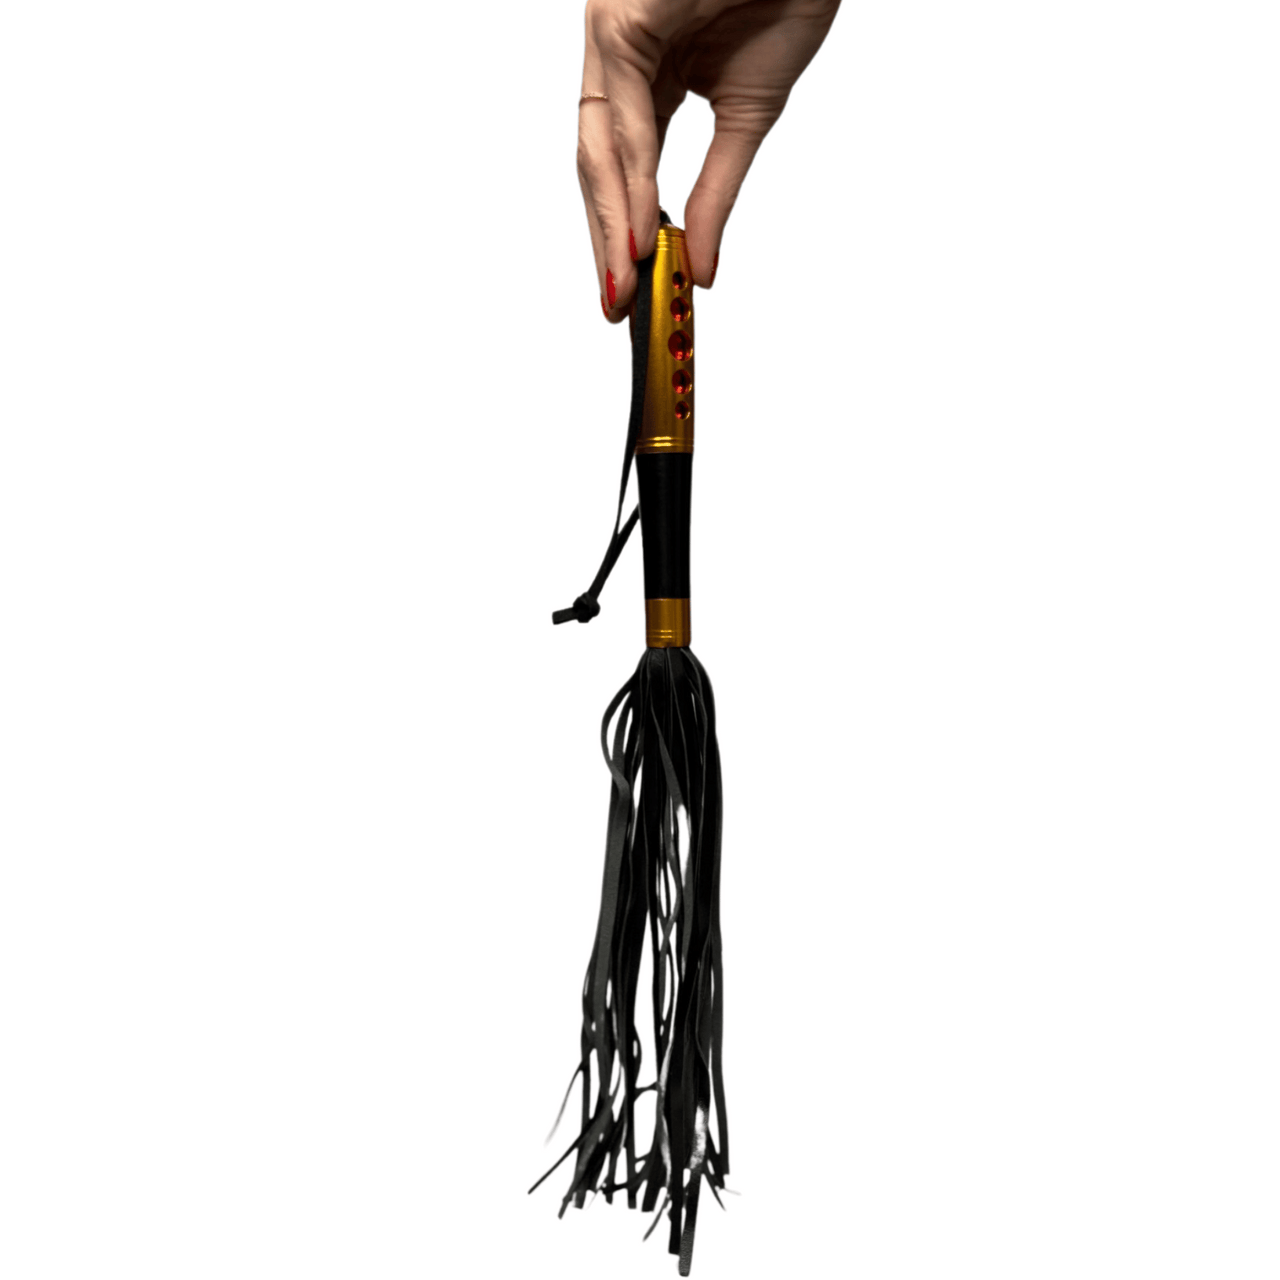 Decorative Flogger with Ornate Handle & Supple Leather Tassels Sensory Play Accessory